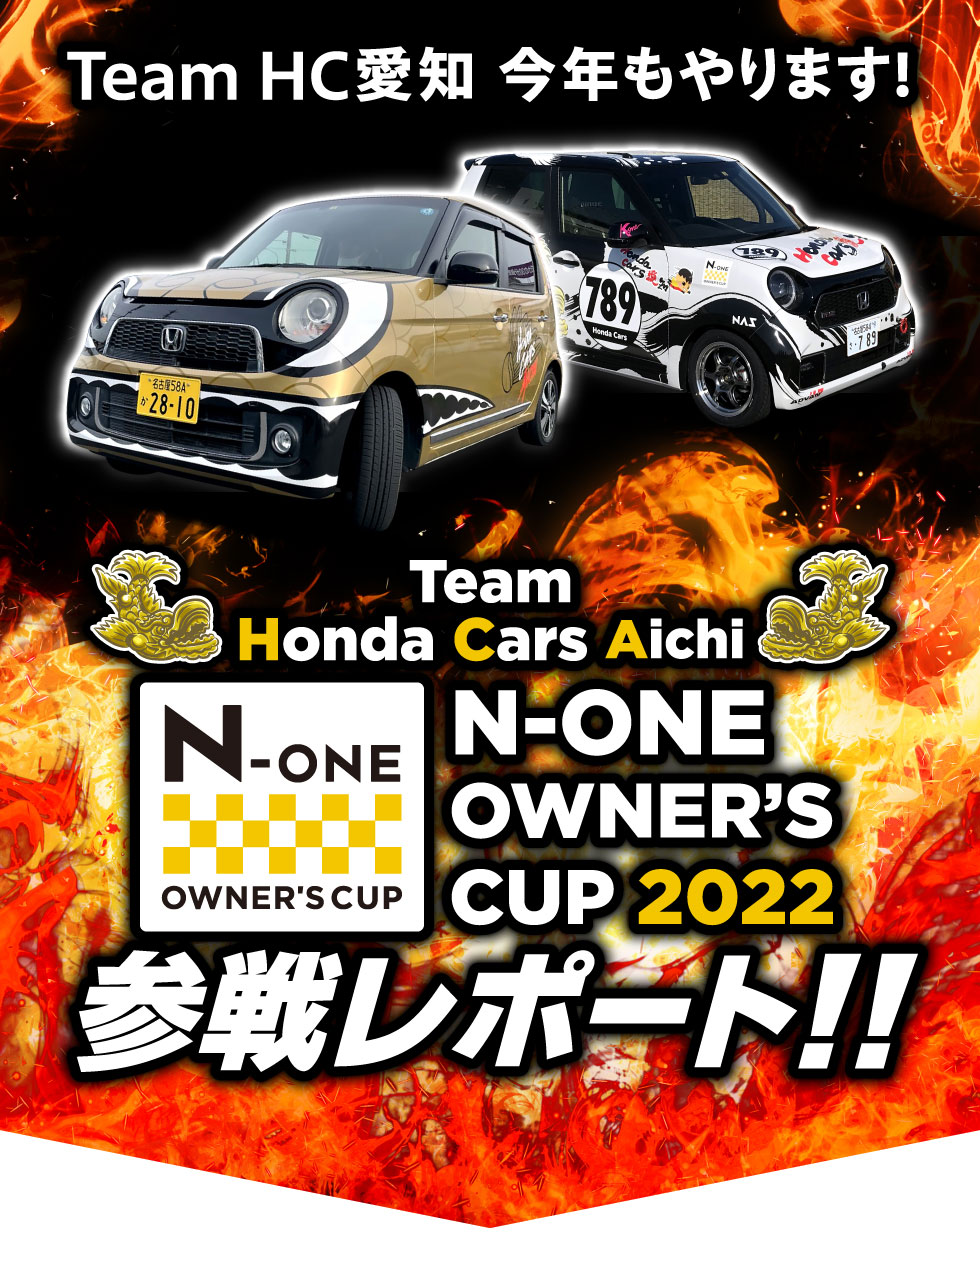 N-ONE OWNER'S CUP 2022 参戦レポート！！